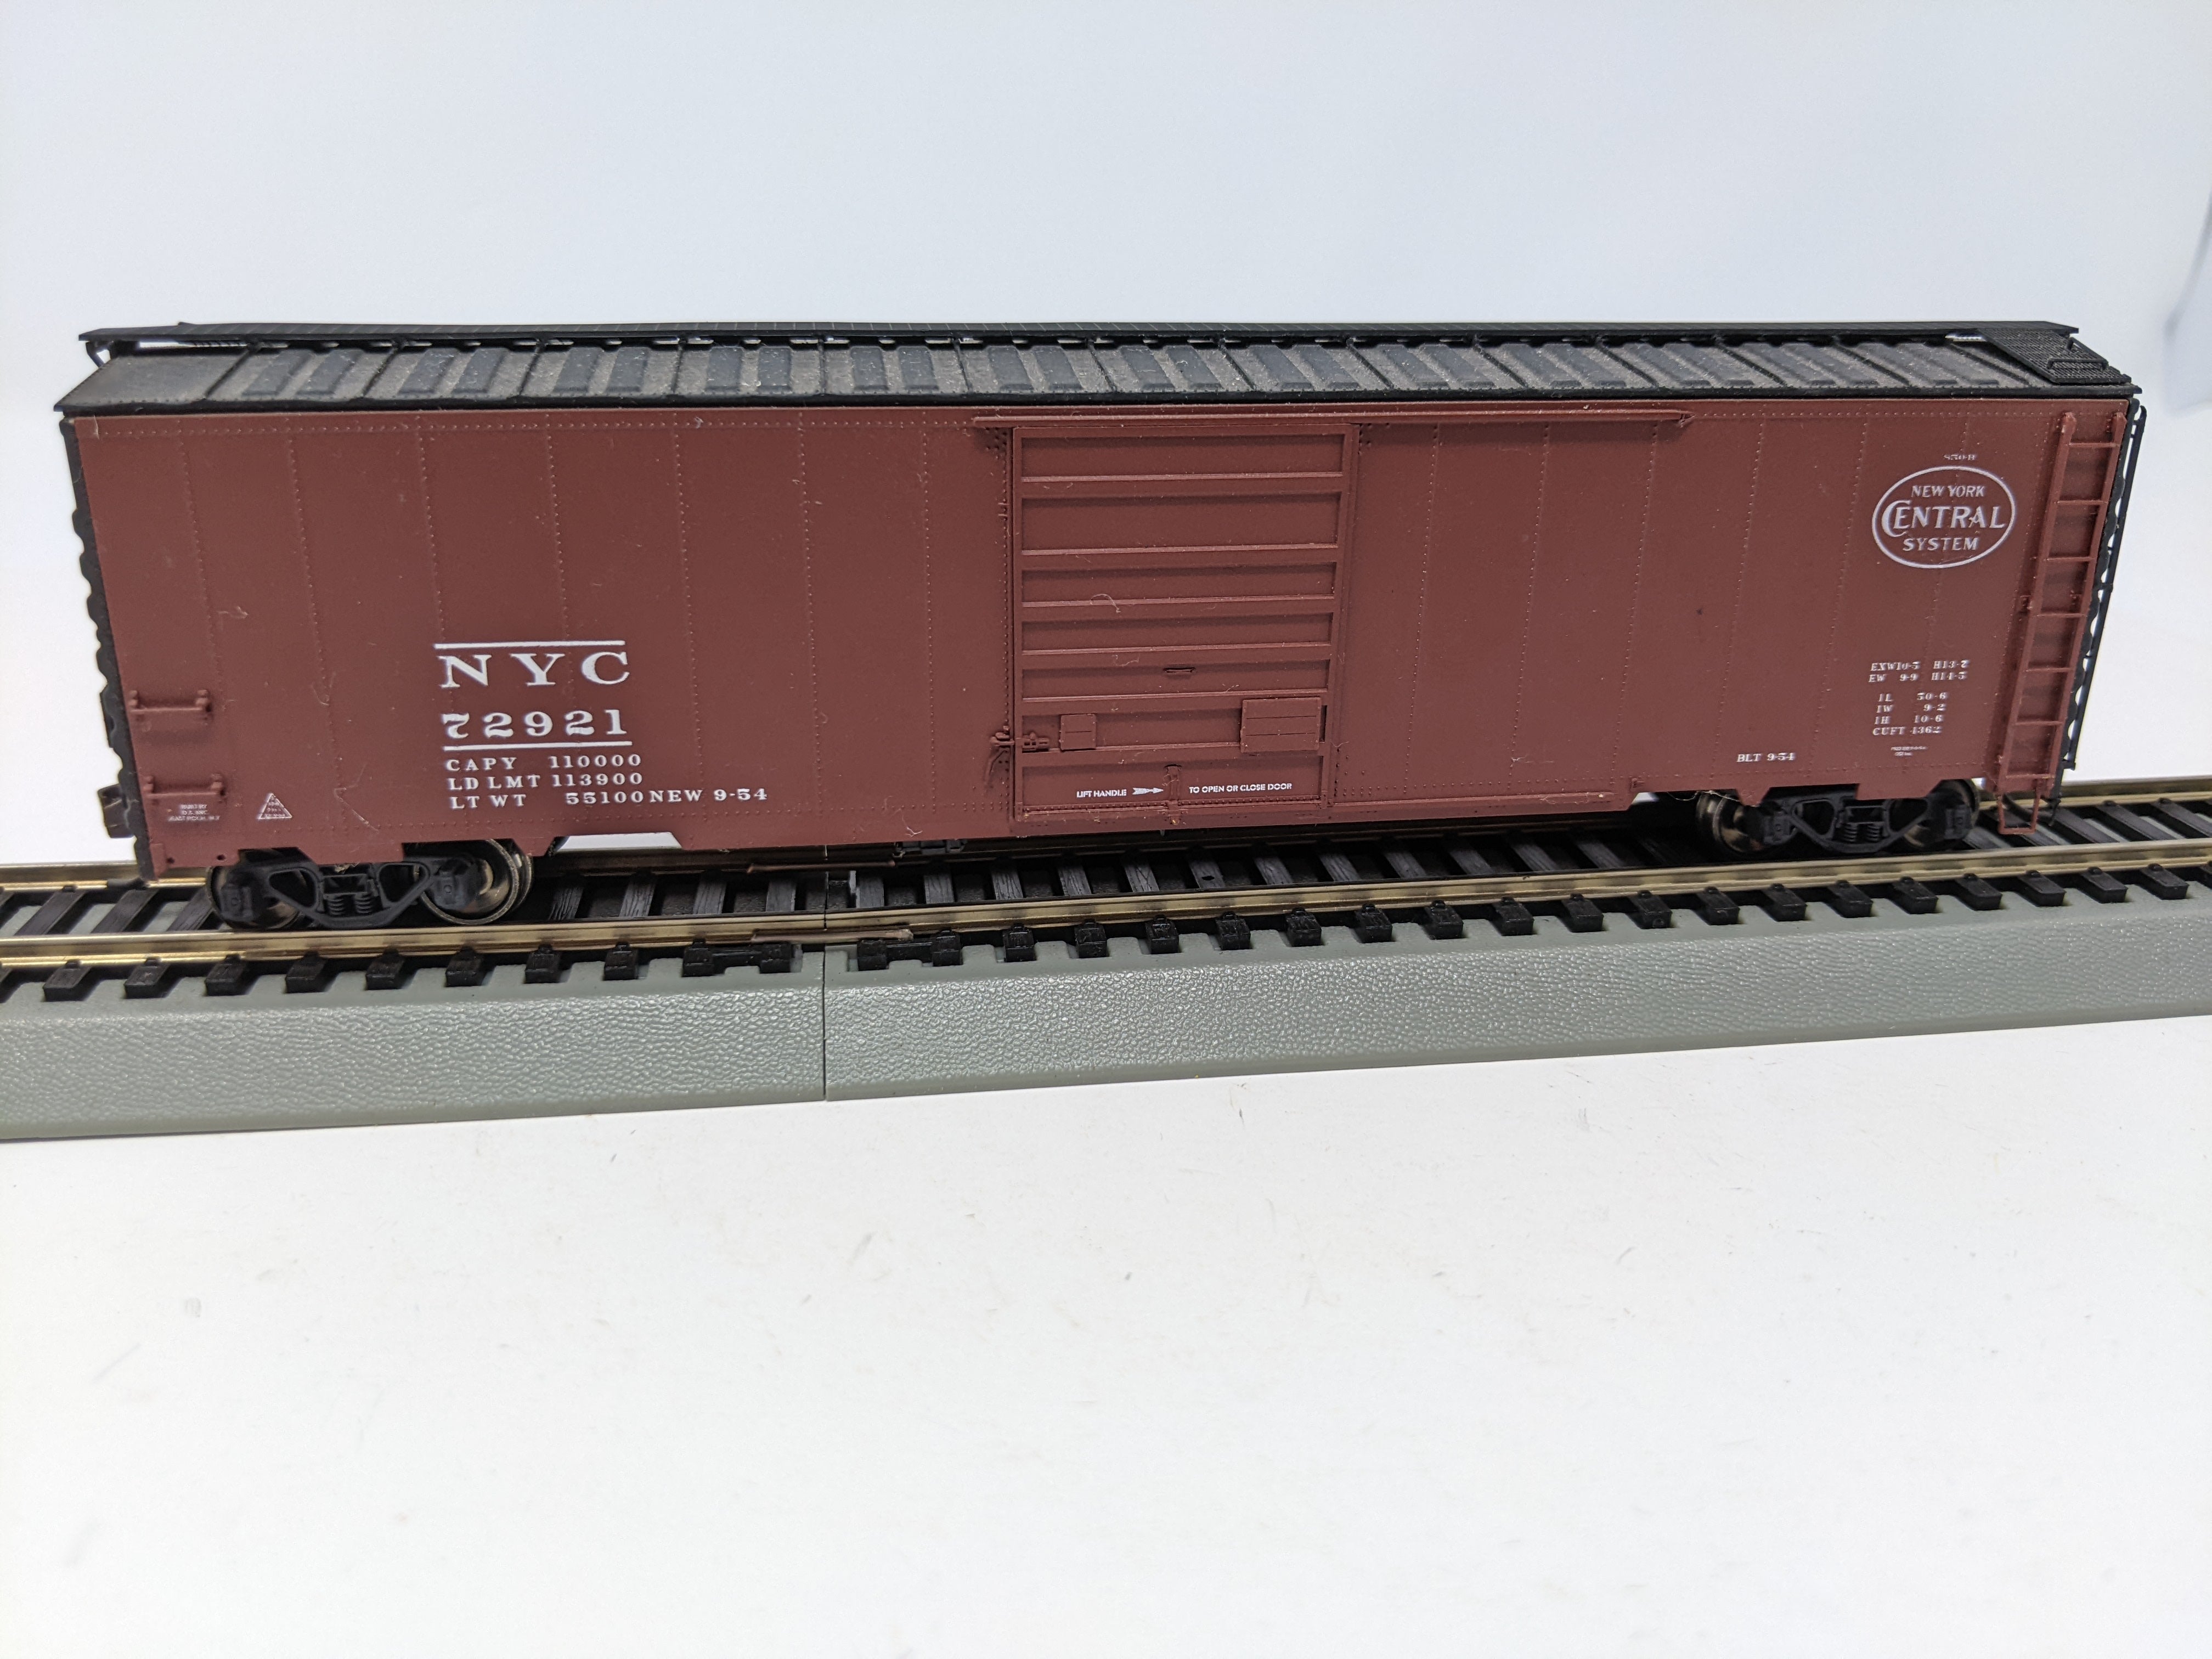 USED HO Scale, 50' Steel Box Car, New York Central NYC #72921, Read Description